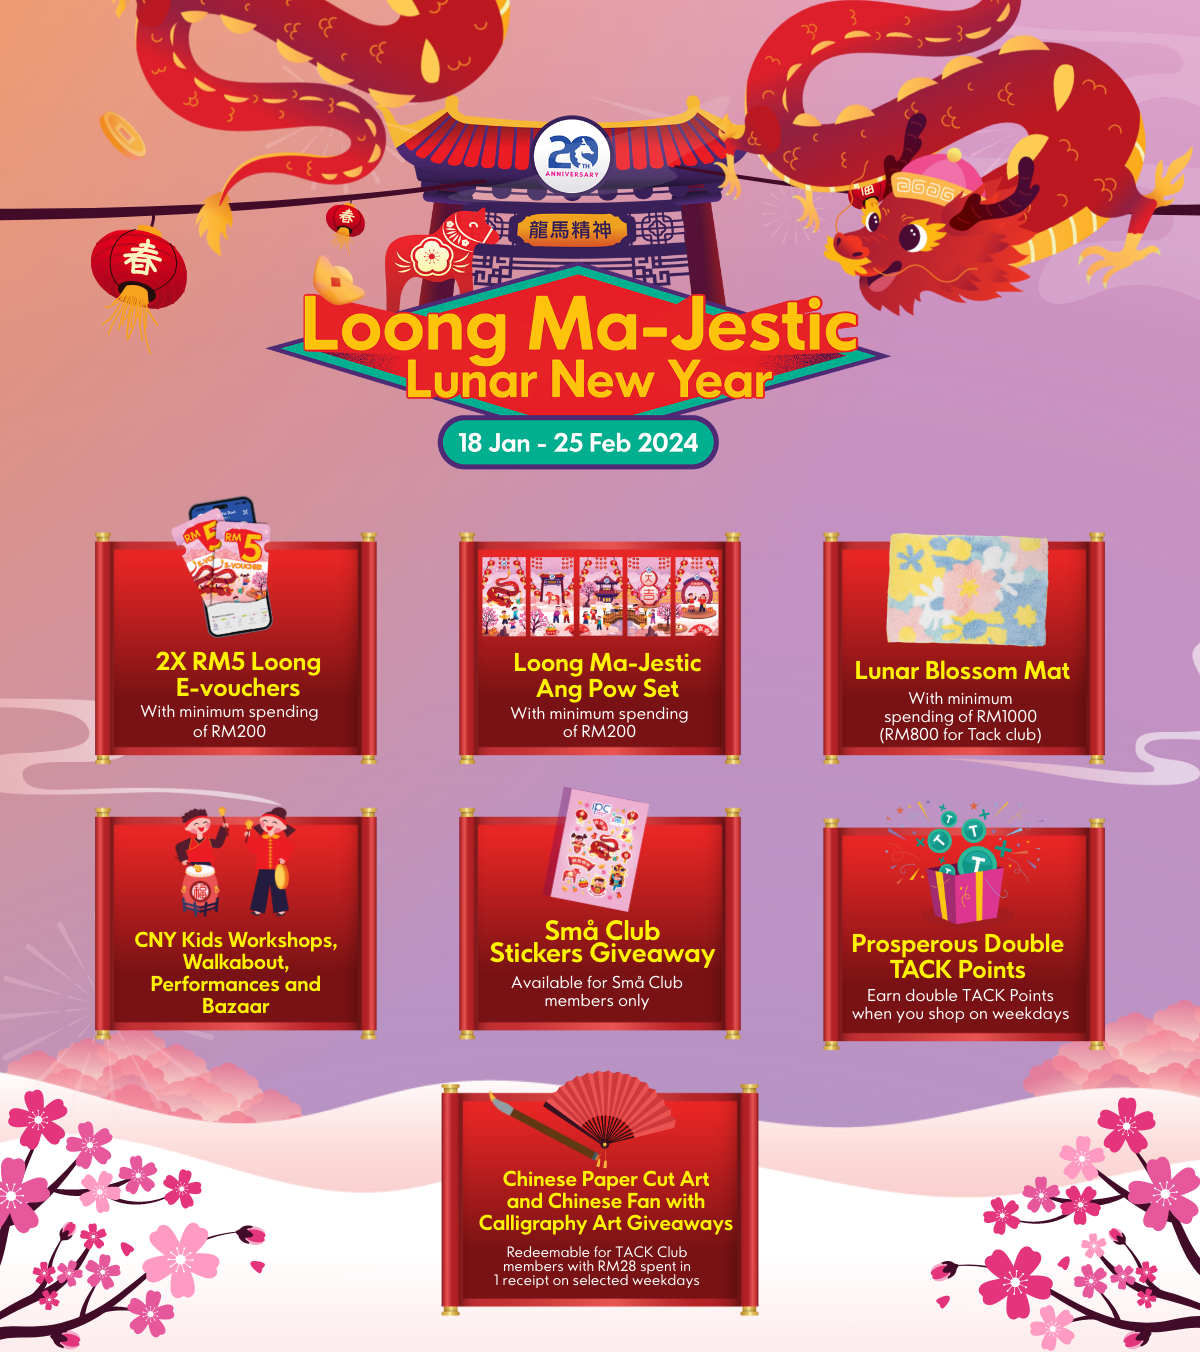 “Loong Ma-Jestic Lunar New Year Campaign